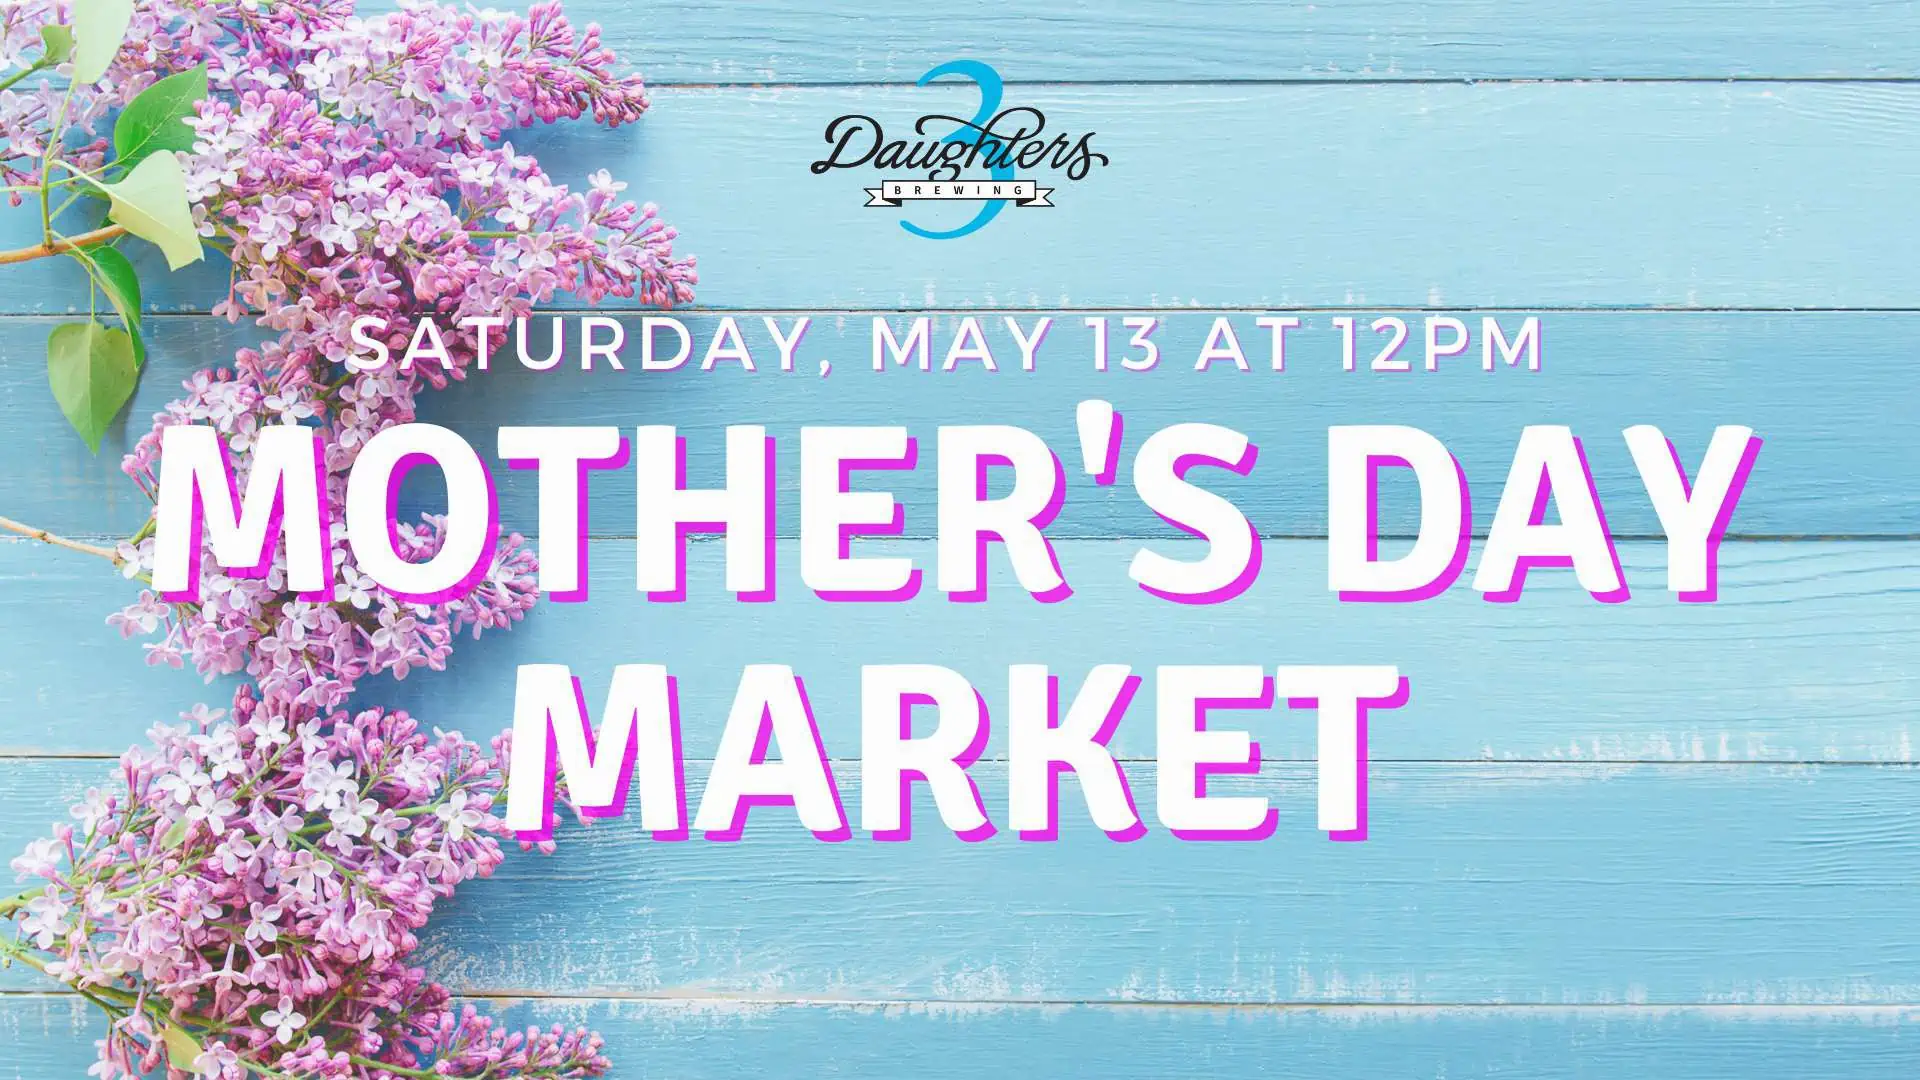 Mother's Day Market at 3 Daughters Brewing